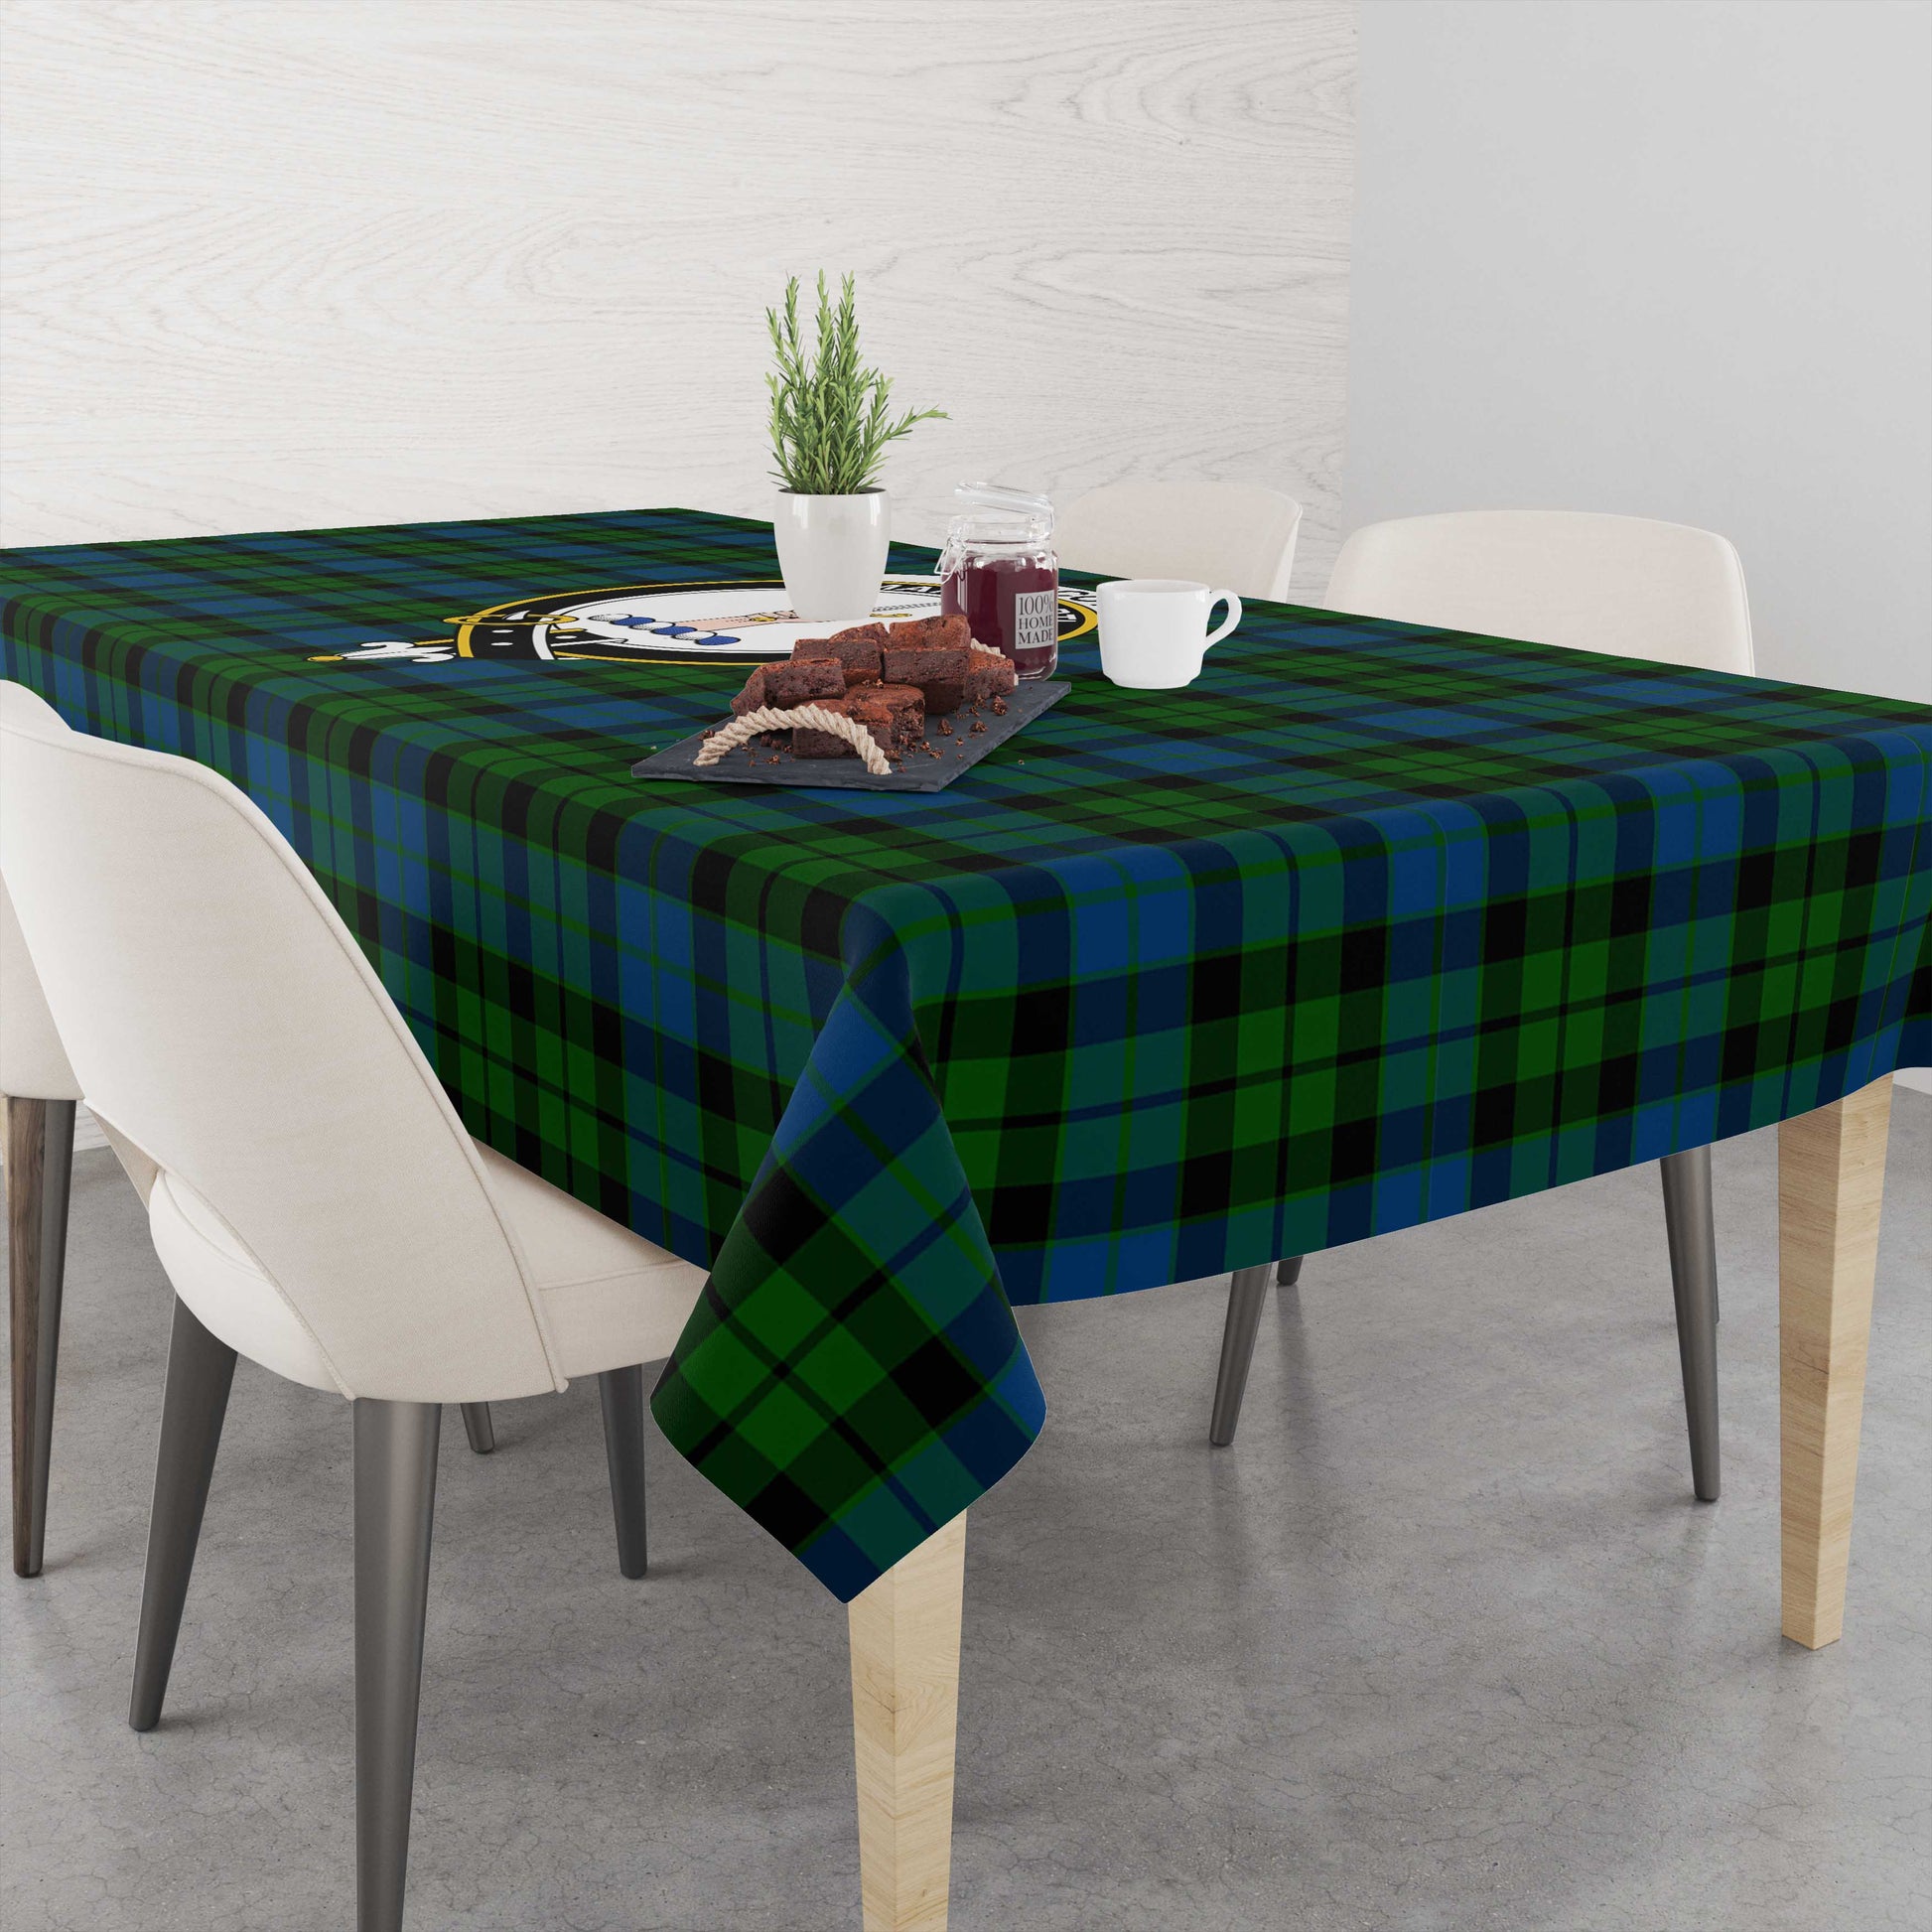 mccoy-tatan-tablecloth-with-family-crest